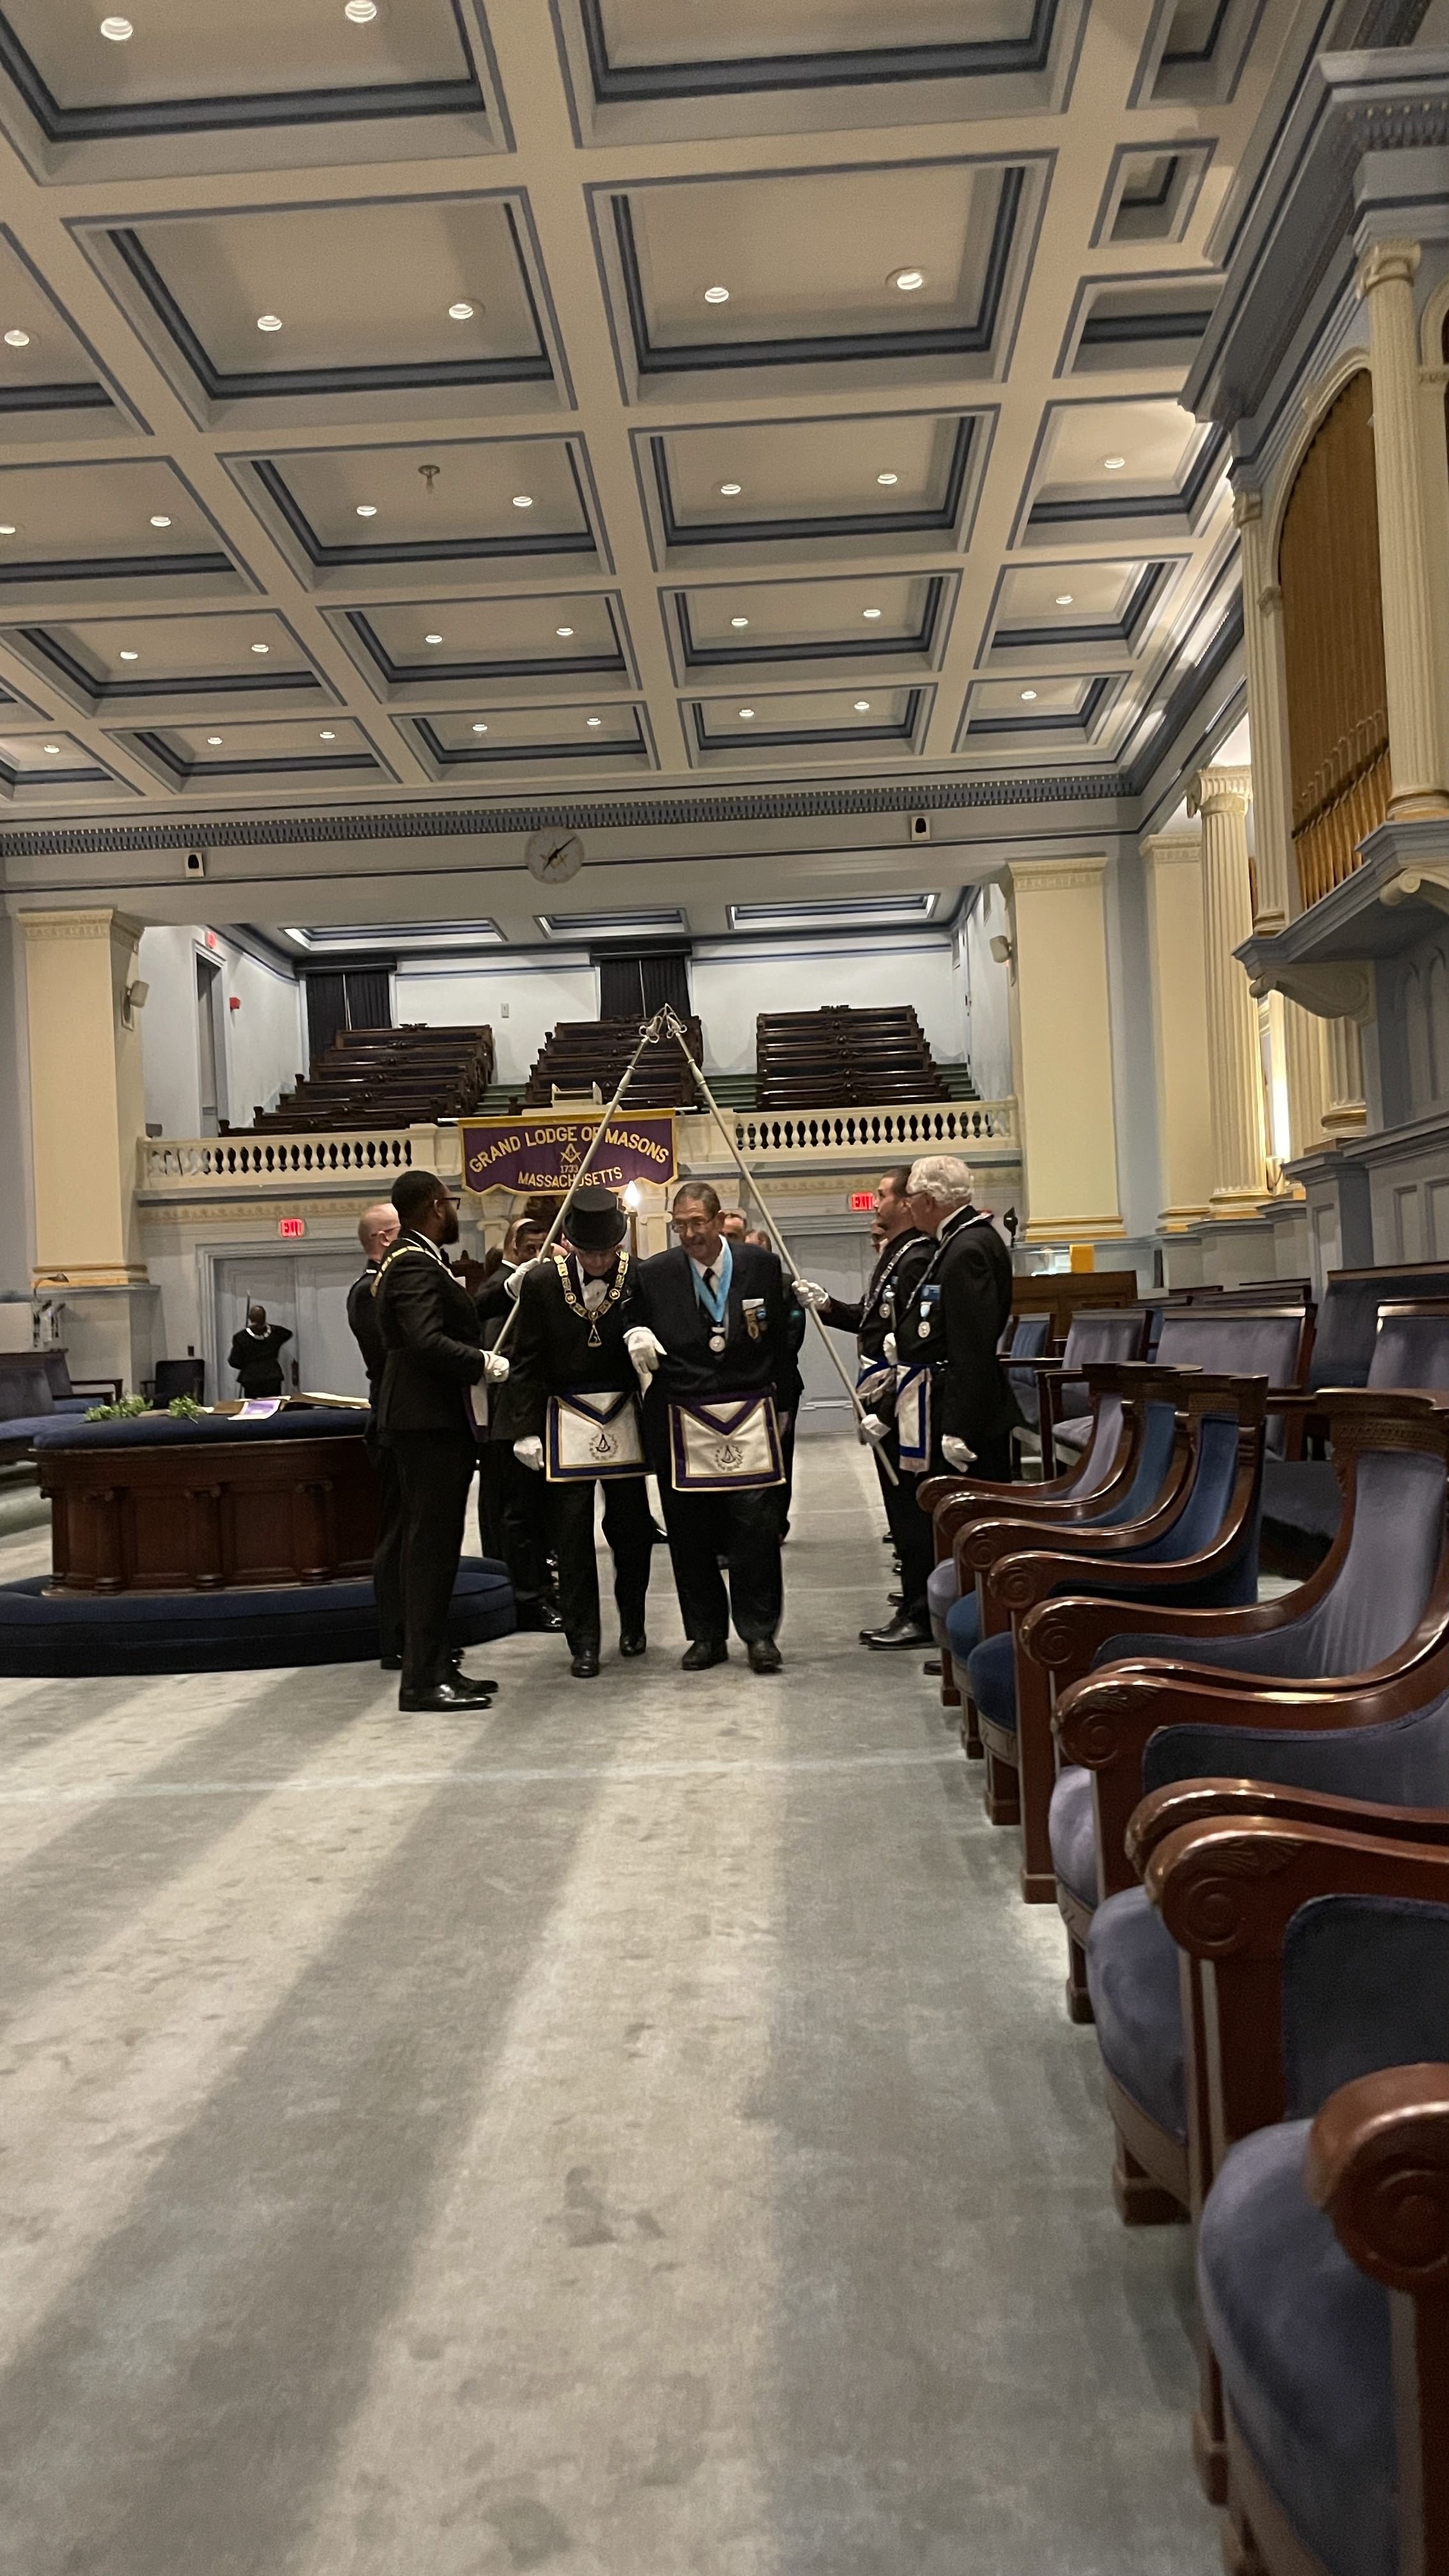  R.W. Thomas Maurice Connelly IV being received into The Henry Price Lodge 